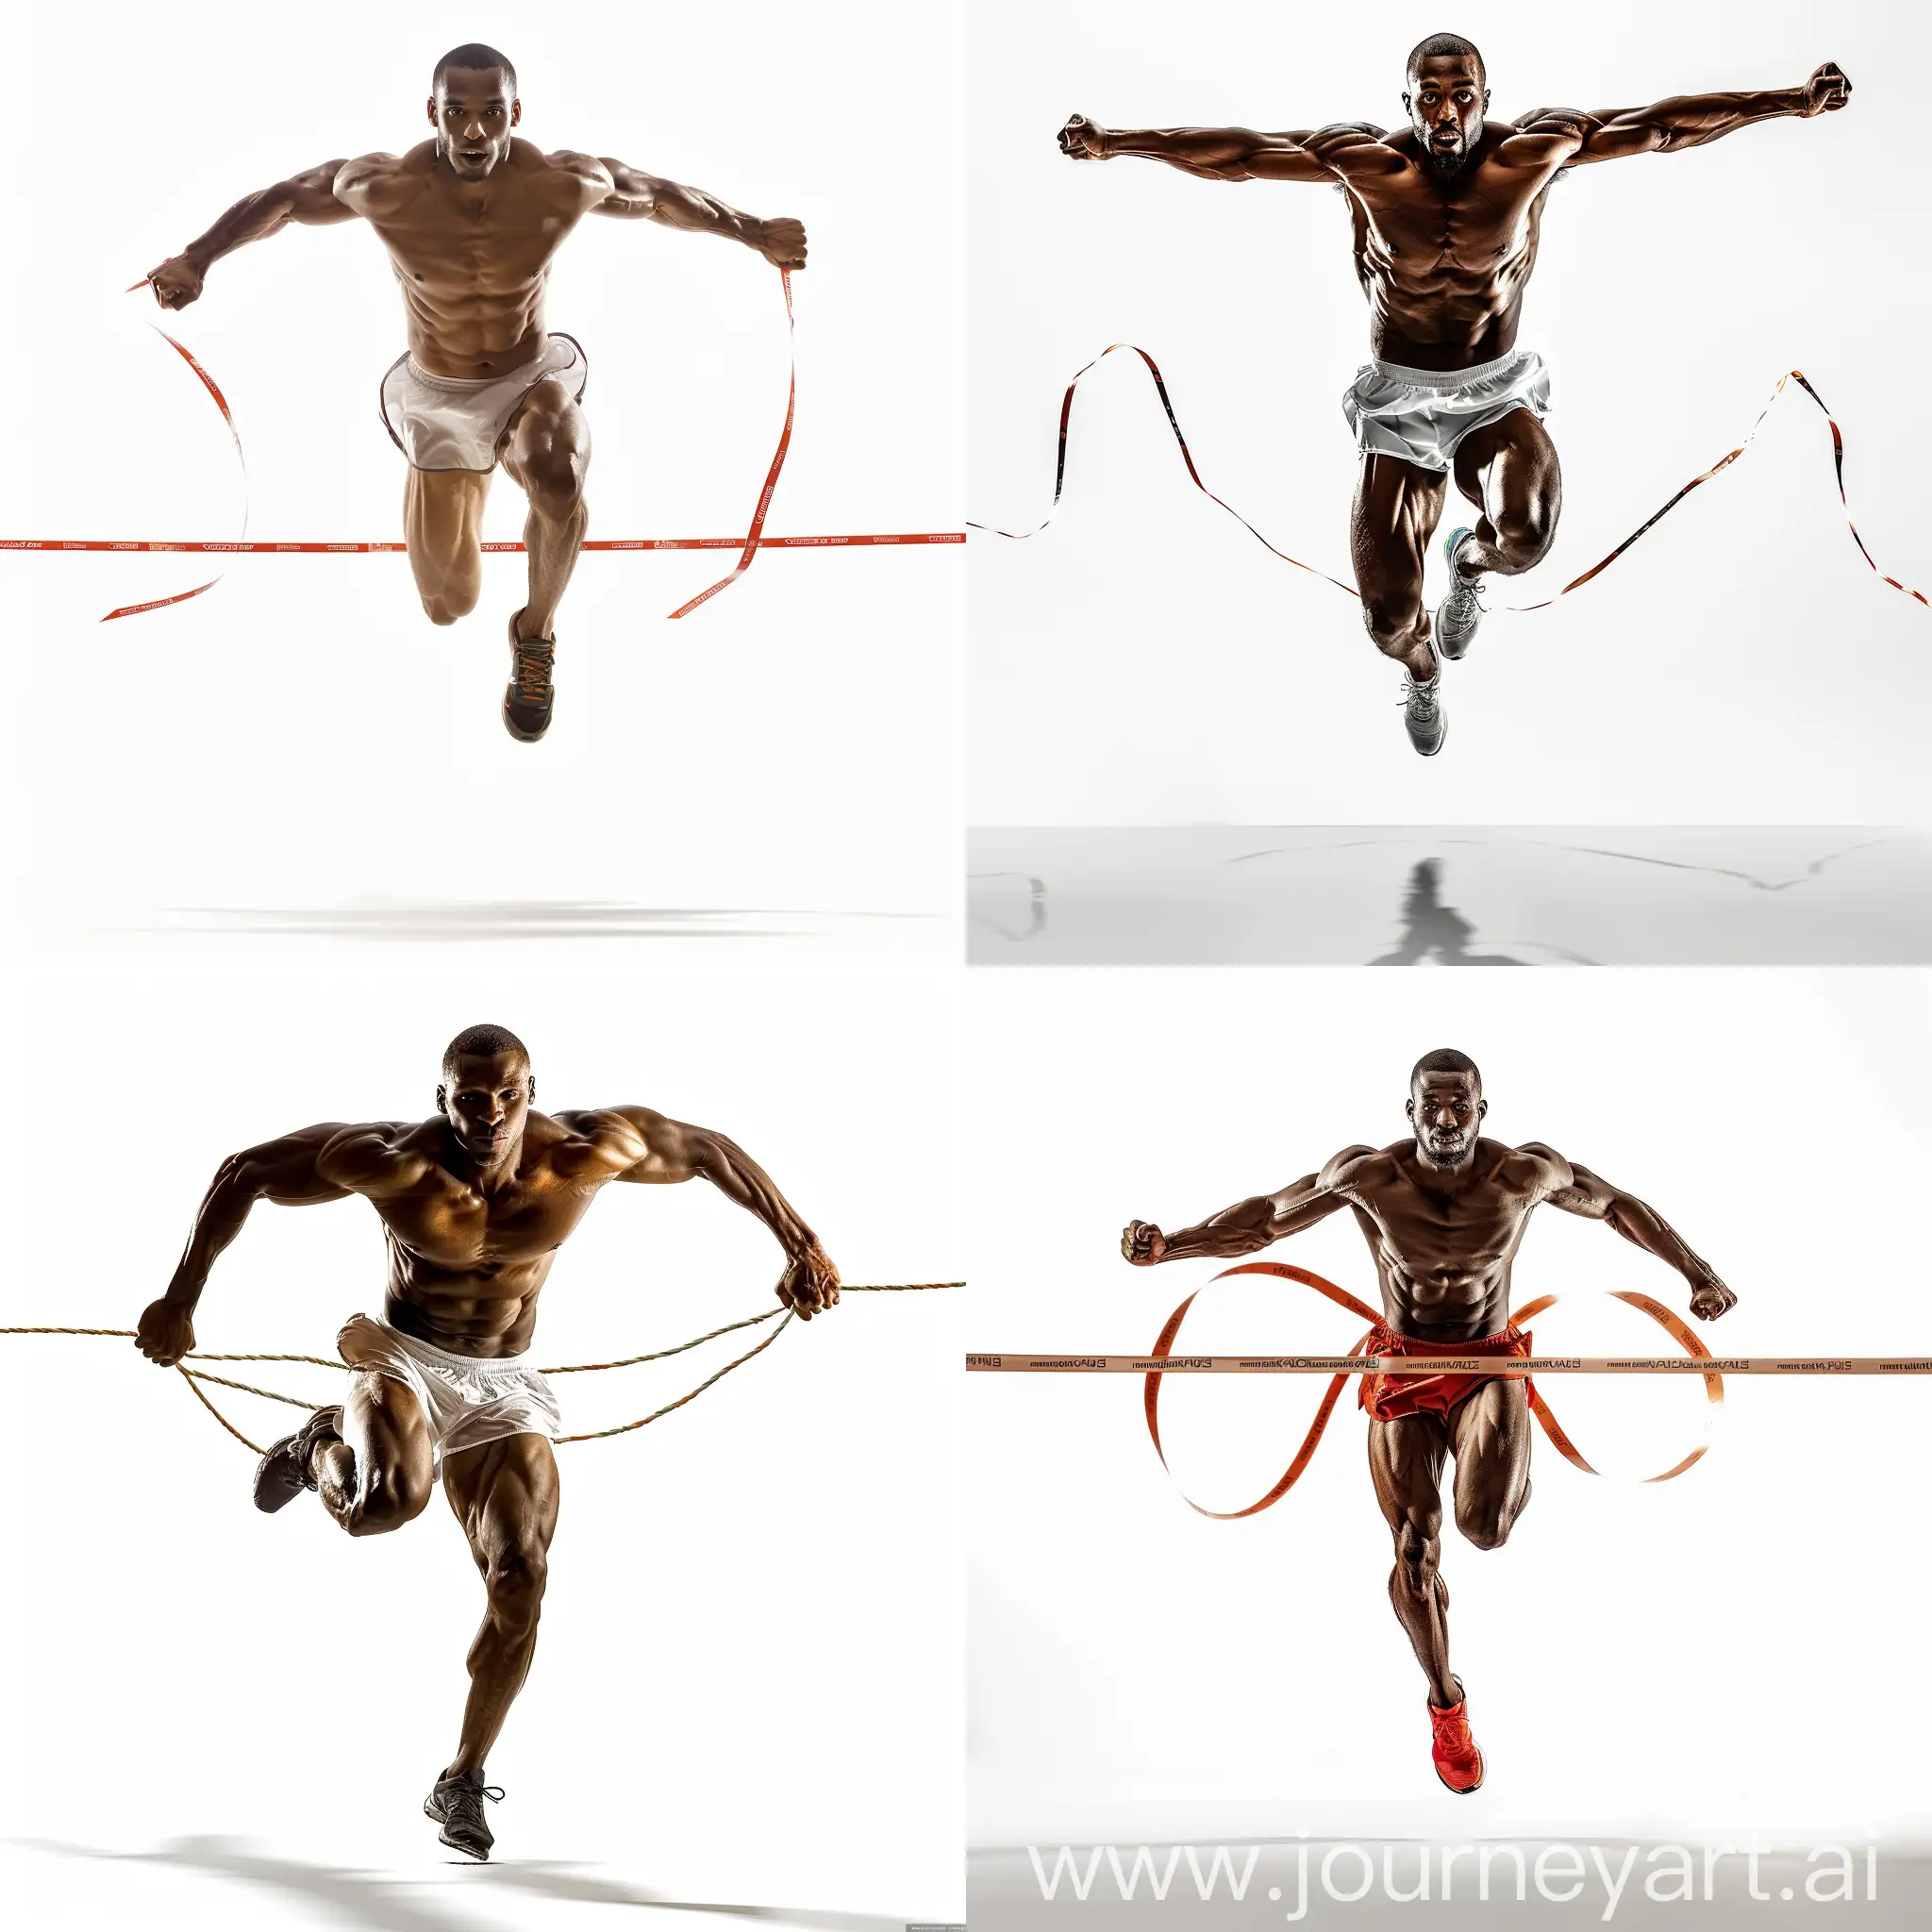 a runner jumping to the finish line, he is trying hard to win the race, front view, natural skin color, natural skin tone, front hard light, realistic, real person, stock image, white background, focus on body, front hard light, hard light, clear body